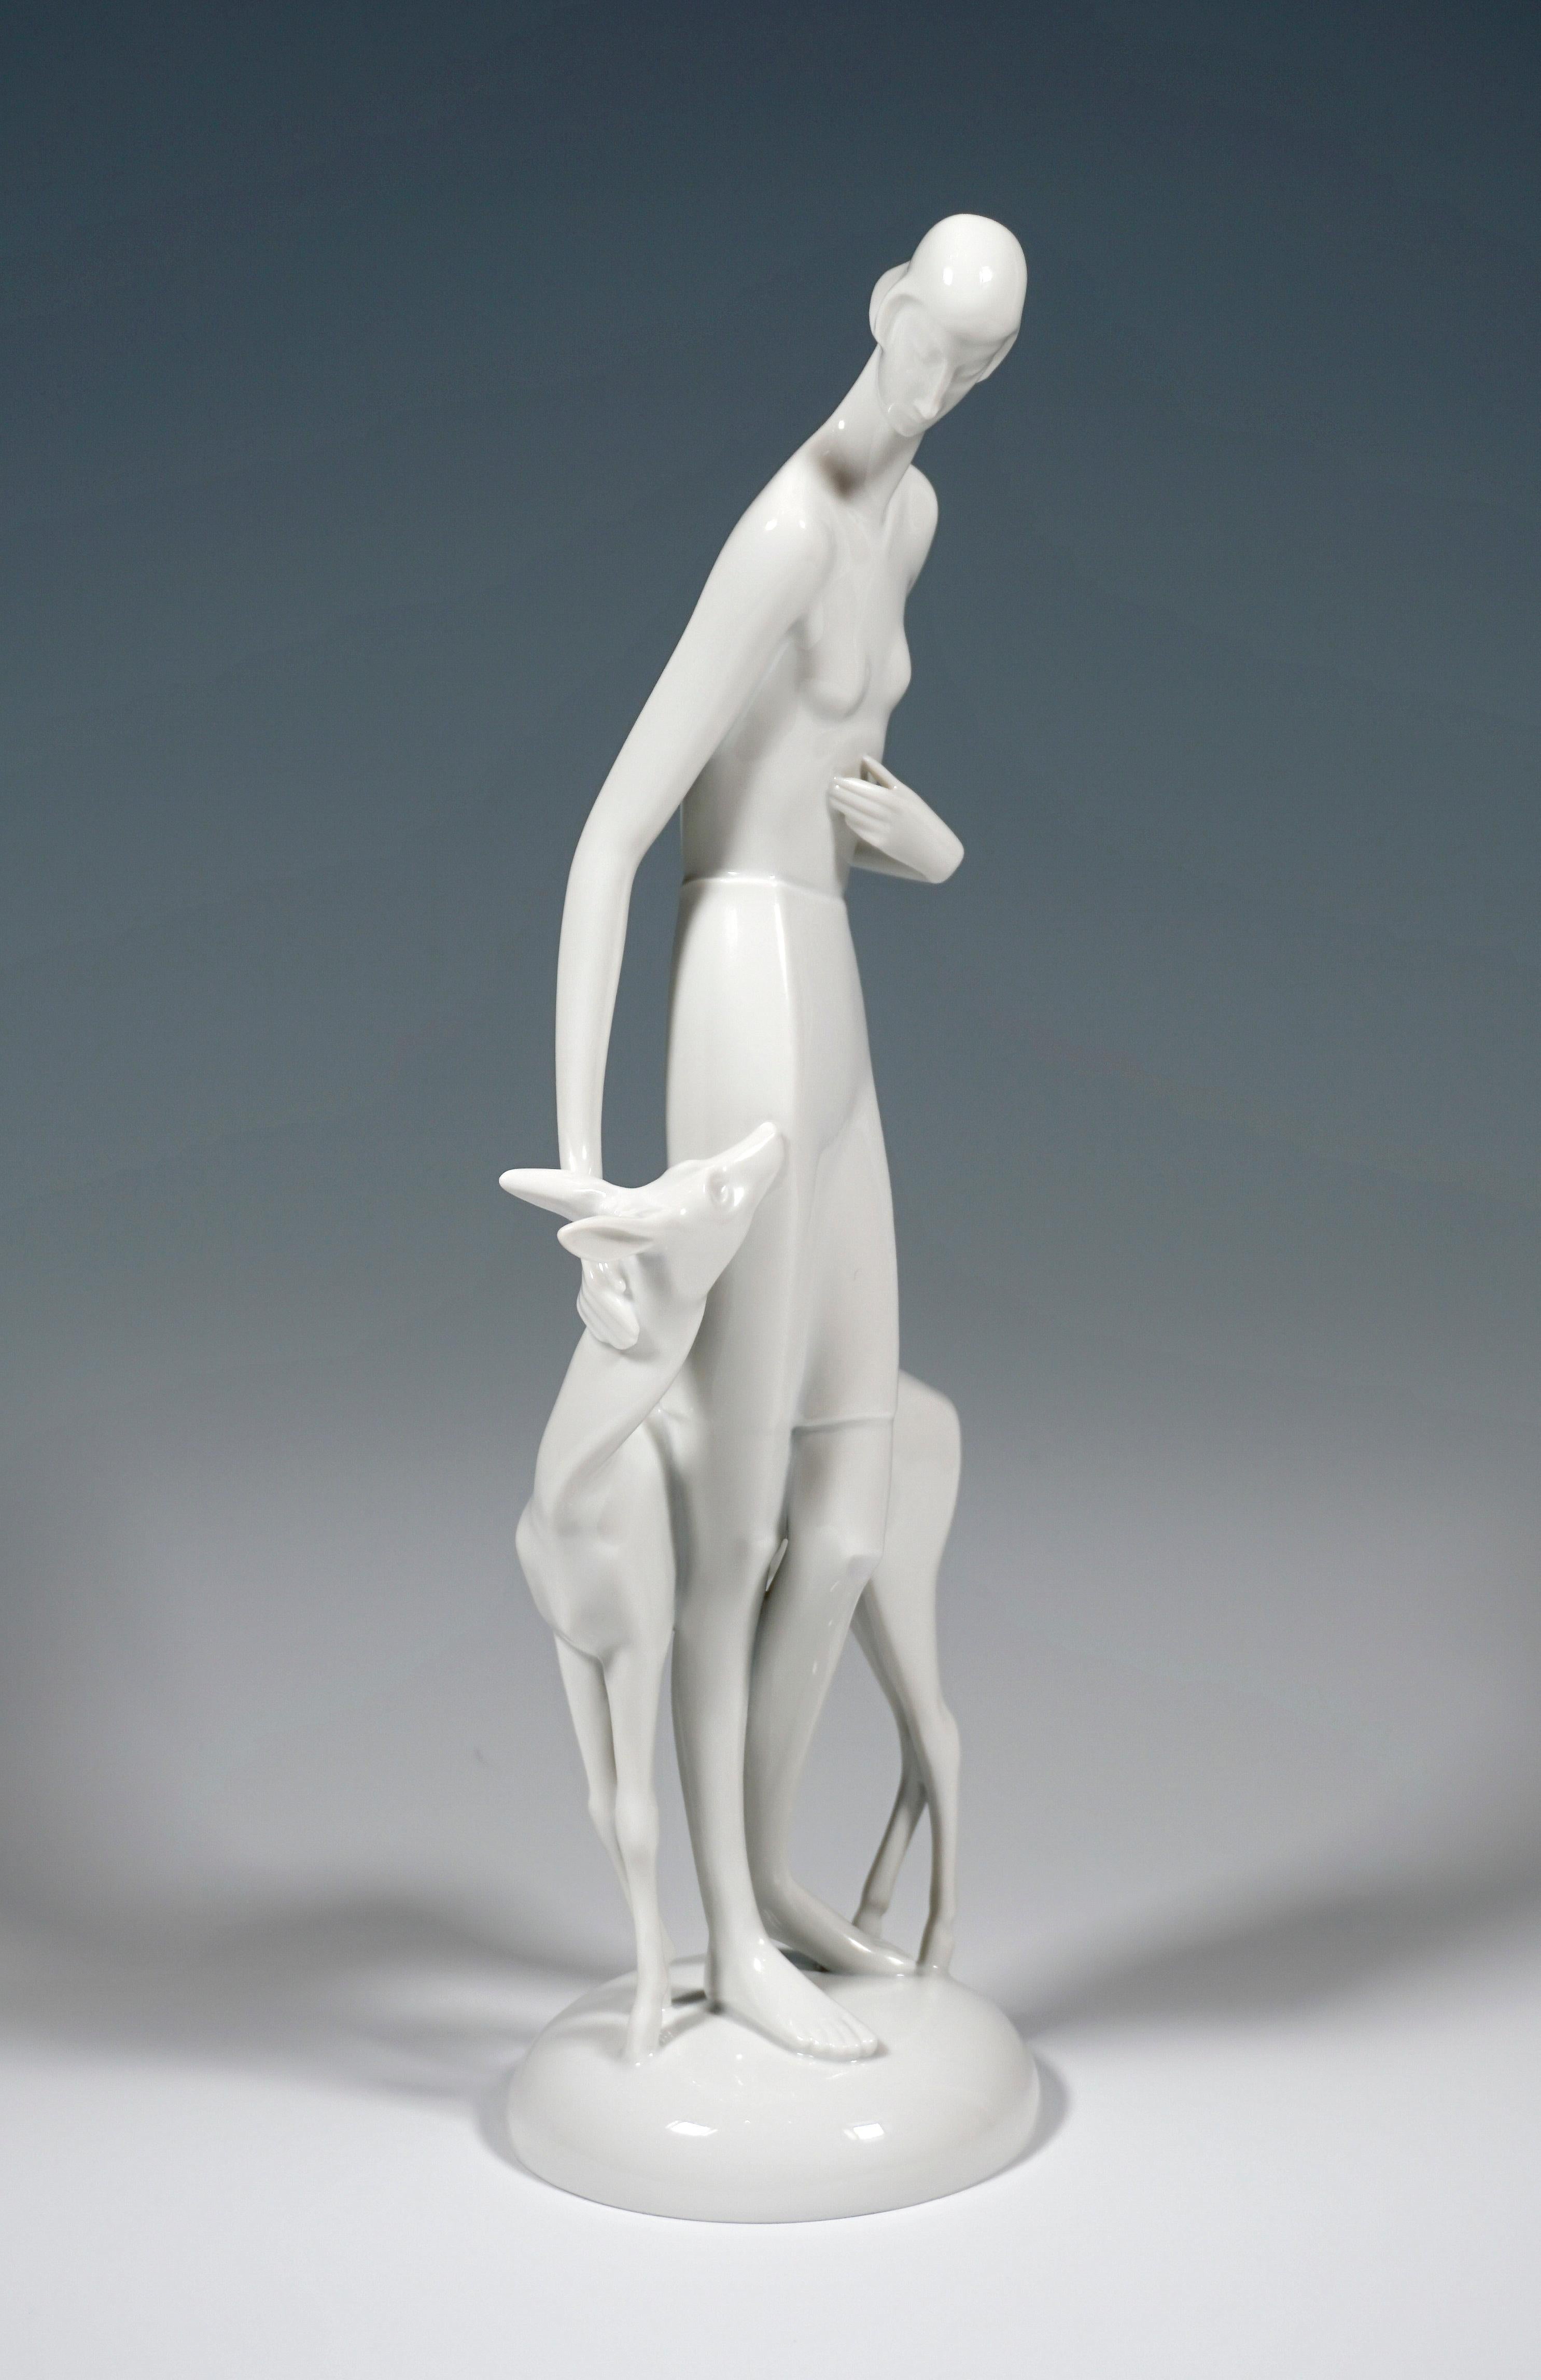 Manneristly elongated young woman, stroking a deer, clad only in a knee-length skirt.
On a cambered, round base.

Designed by Gerhard Schliepstein (1886 - 1963), German sculptor and designer of Art Deco as well as a porcelain modeller. Until the